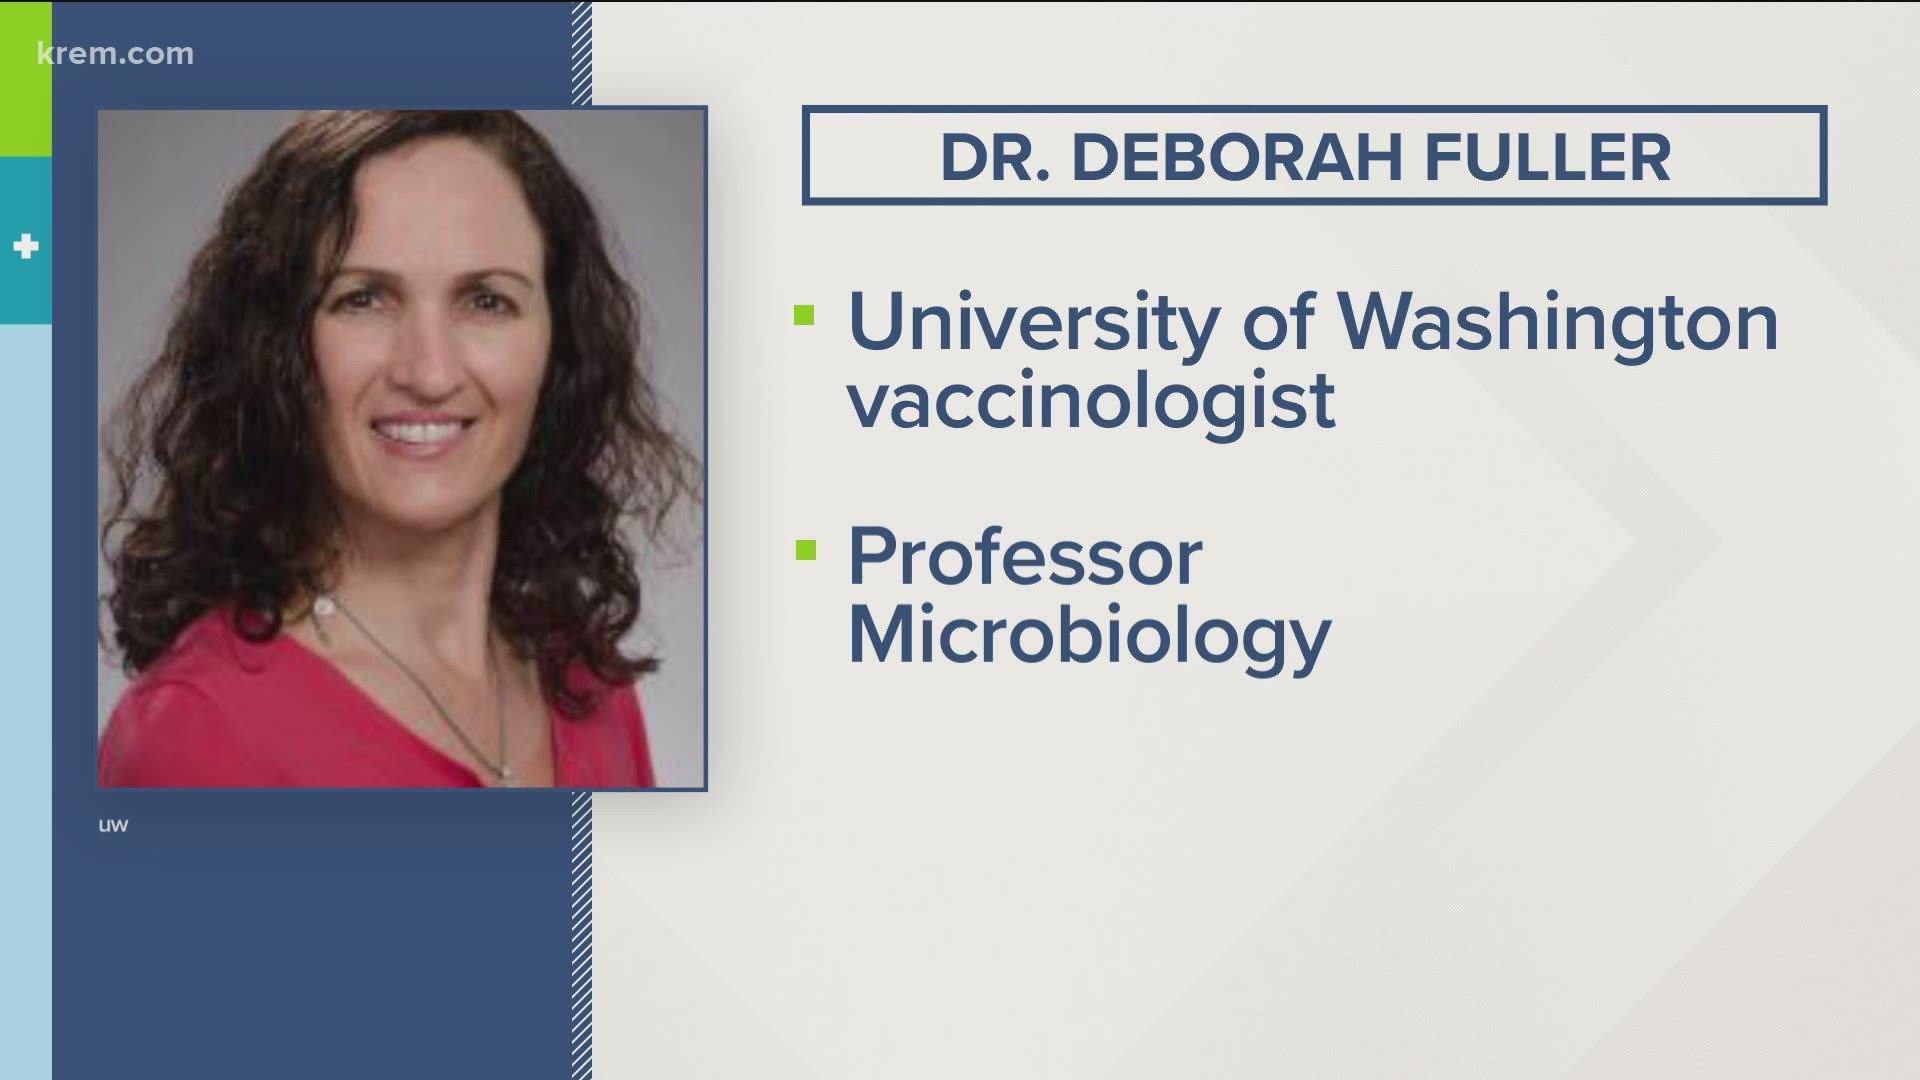 Dr. Fuller is a University of Washington vaccinologist and will answer frequently asked questions about the COVID-19 vaccines.